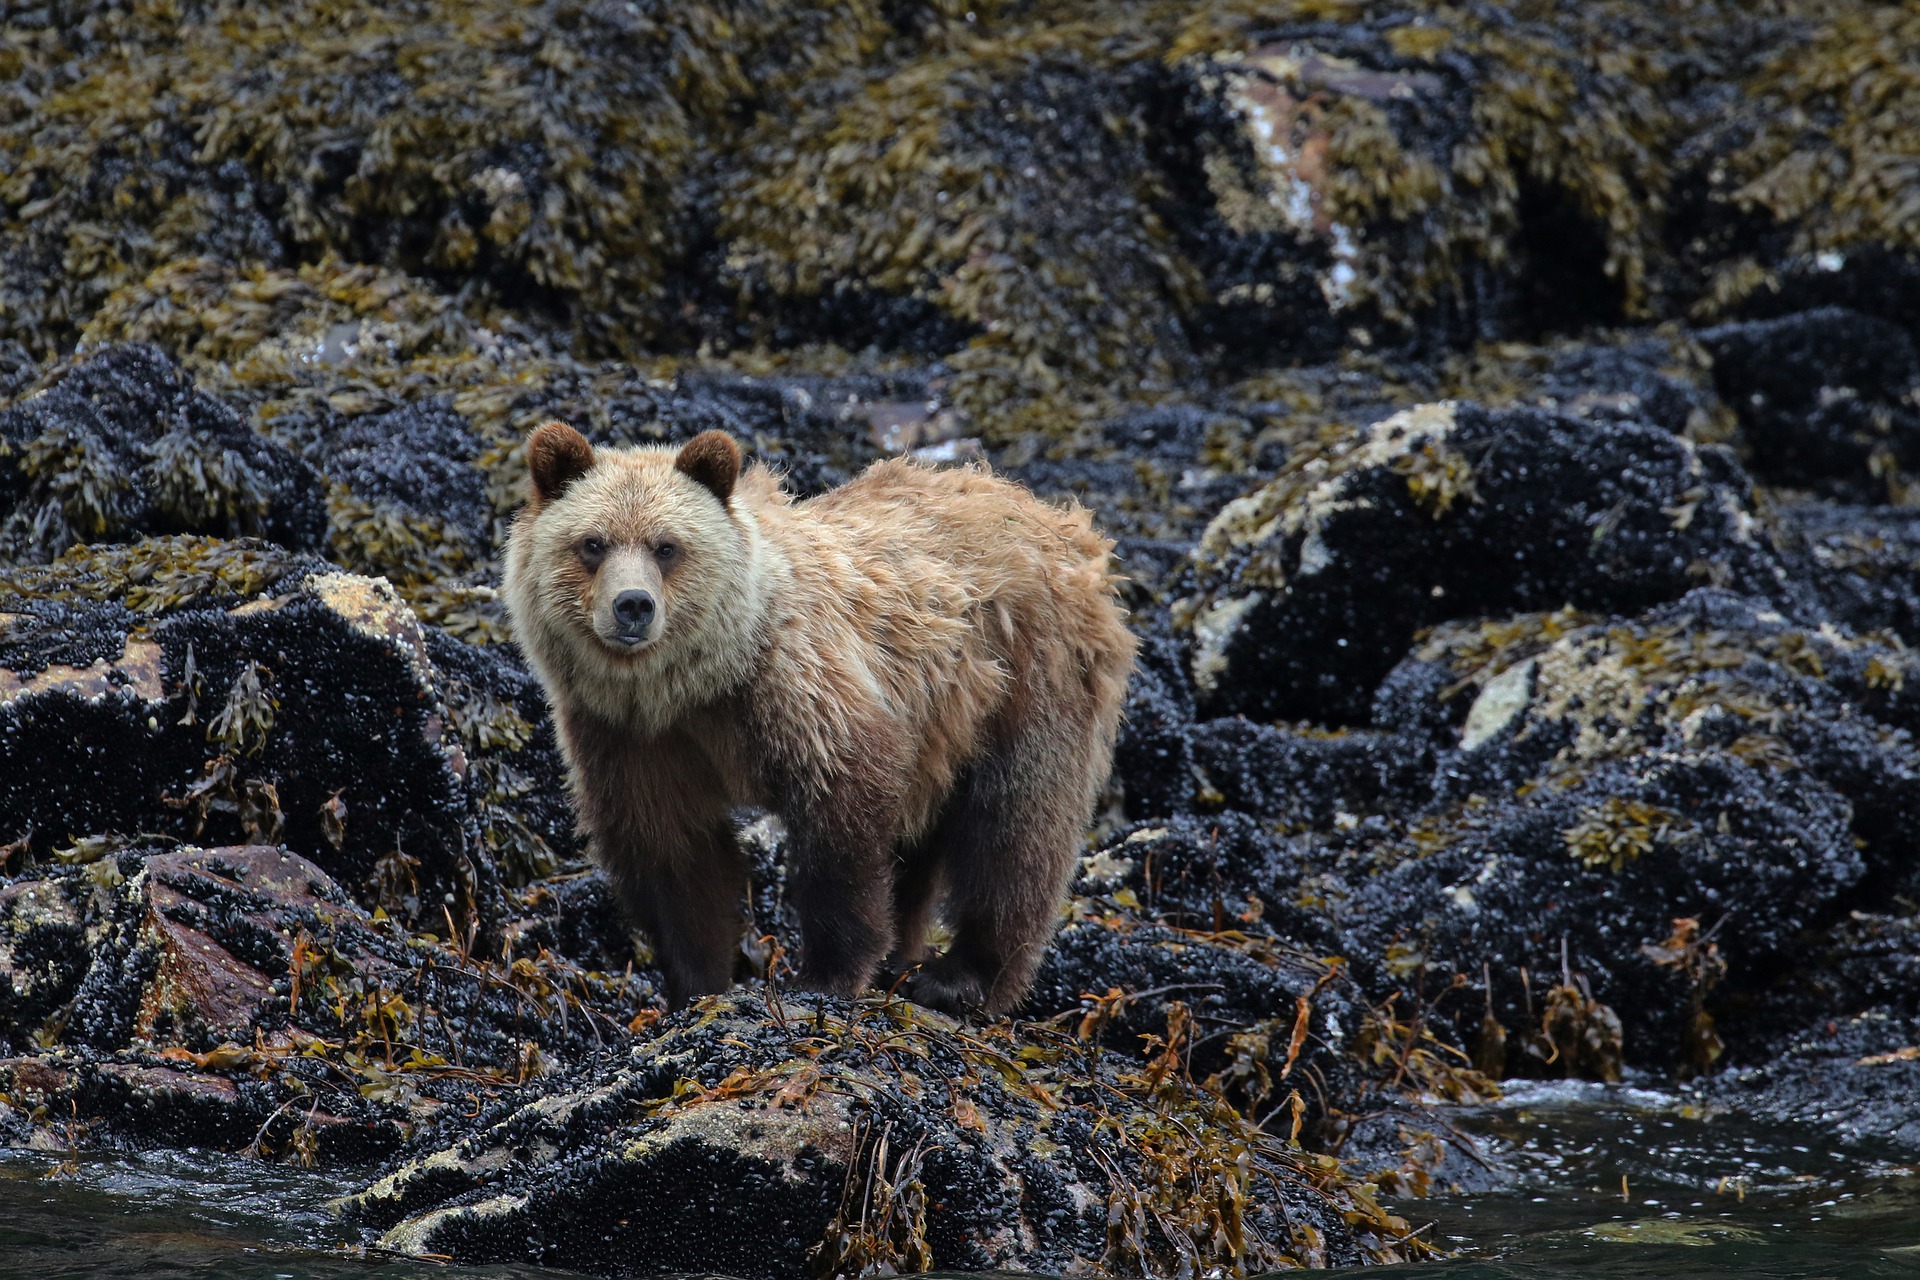 Grizzly bear standing on wet rocks